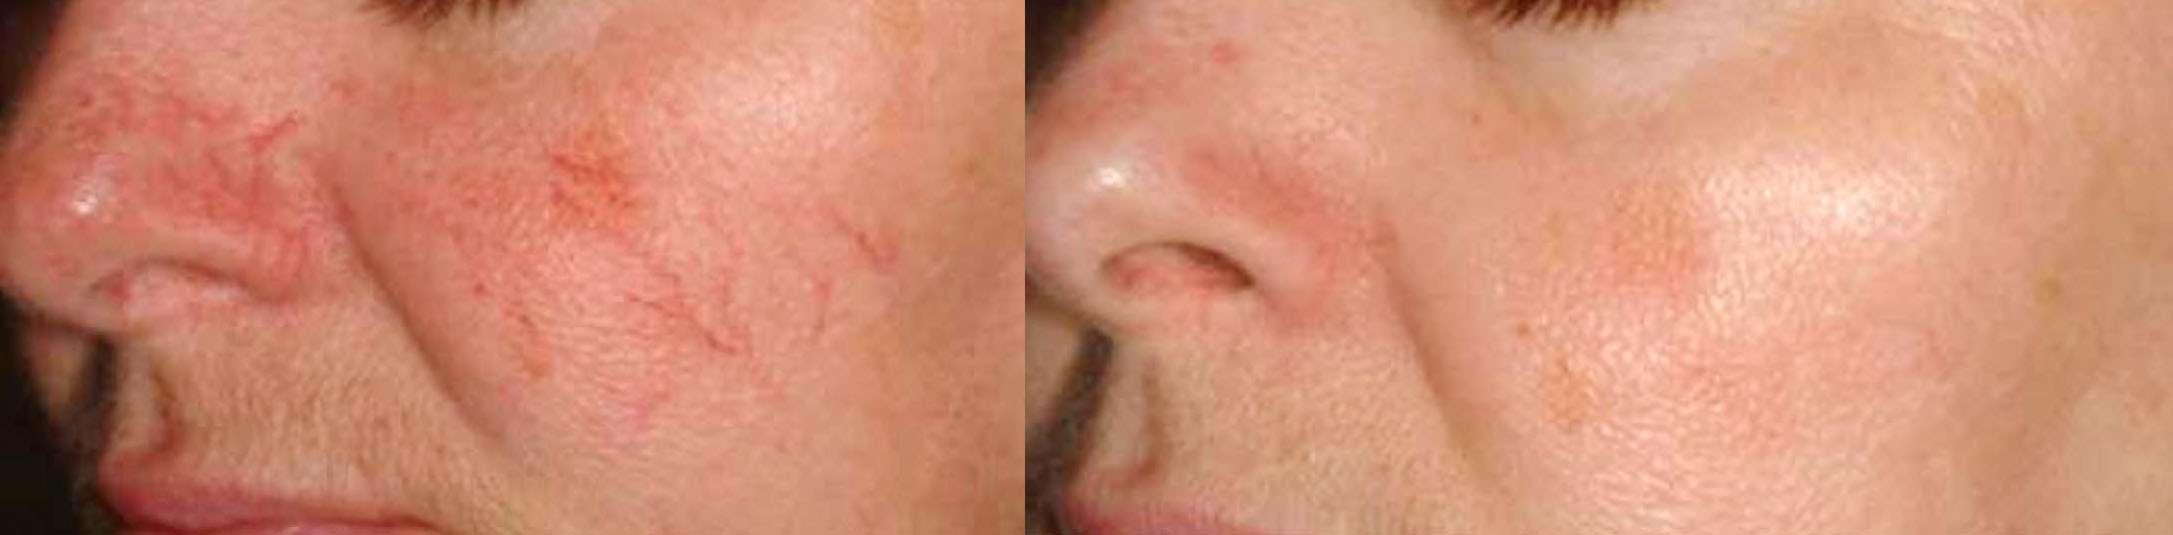 Rosacea - before and after treatment, female patient, face, cheek